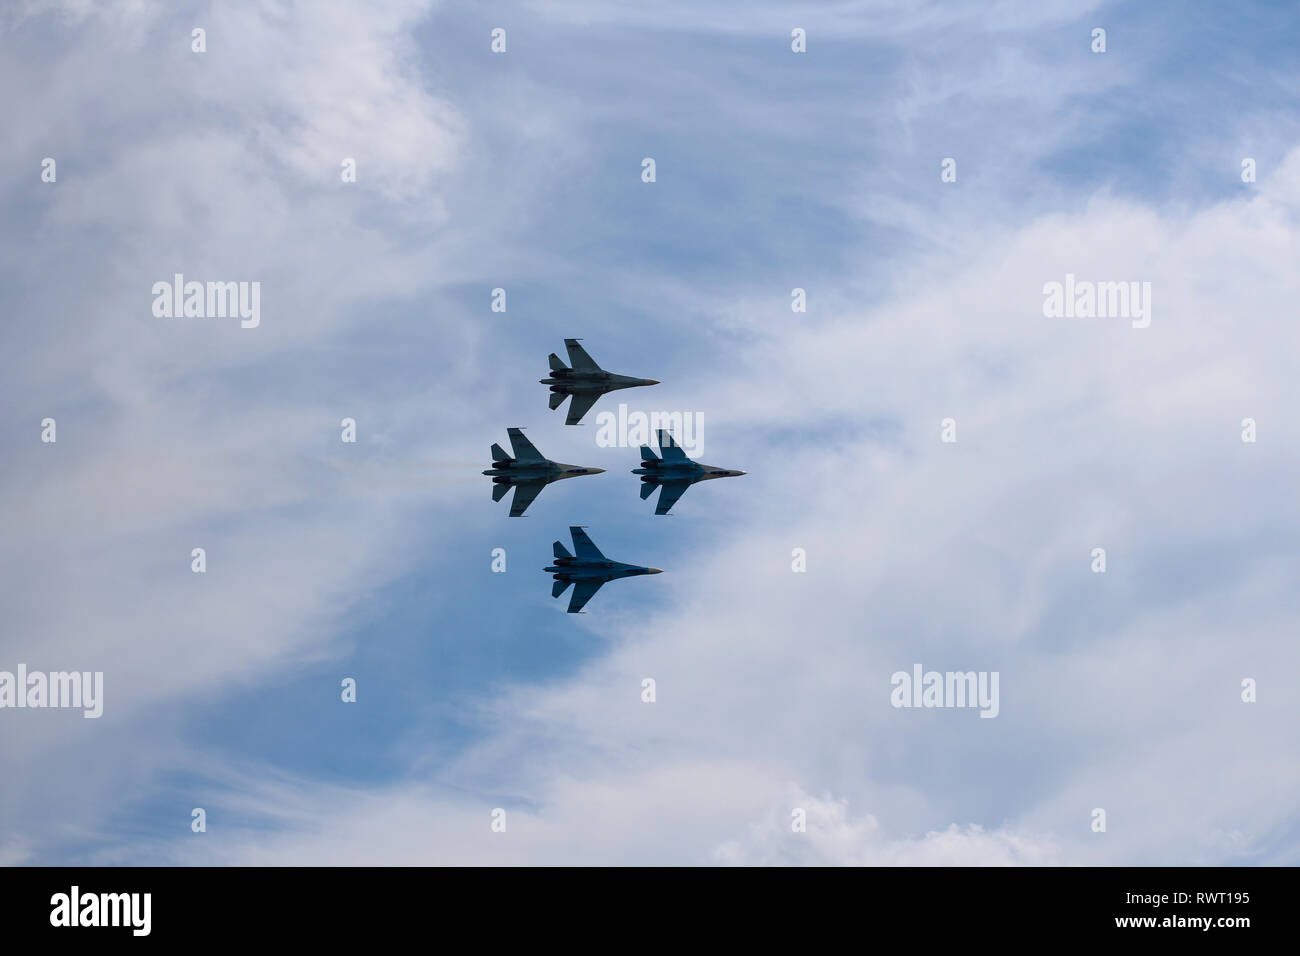 Four aircraft combat fighters SU-34 military fighters flying in the sky a great strong powerful Stock Photo